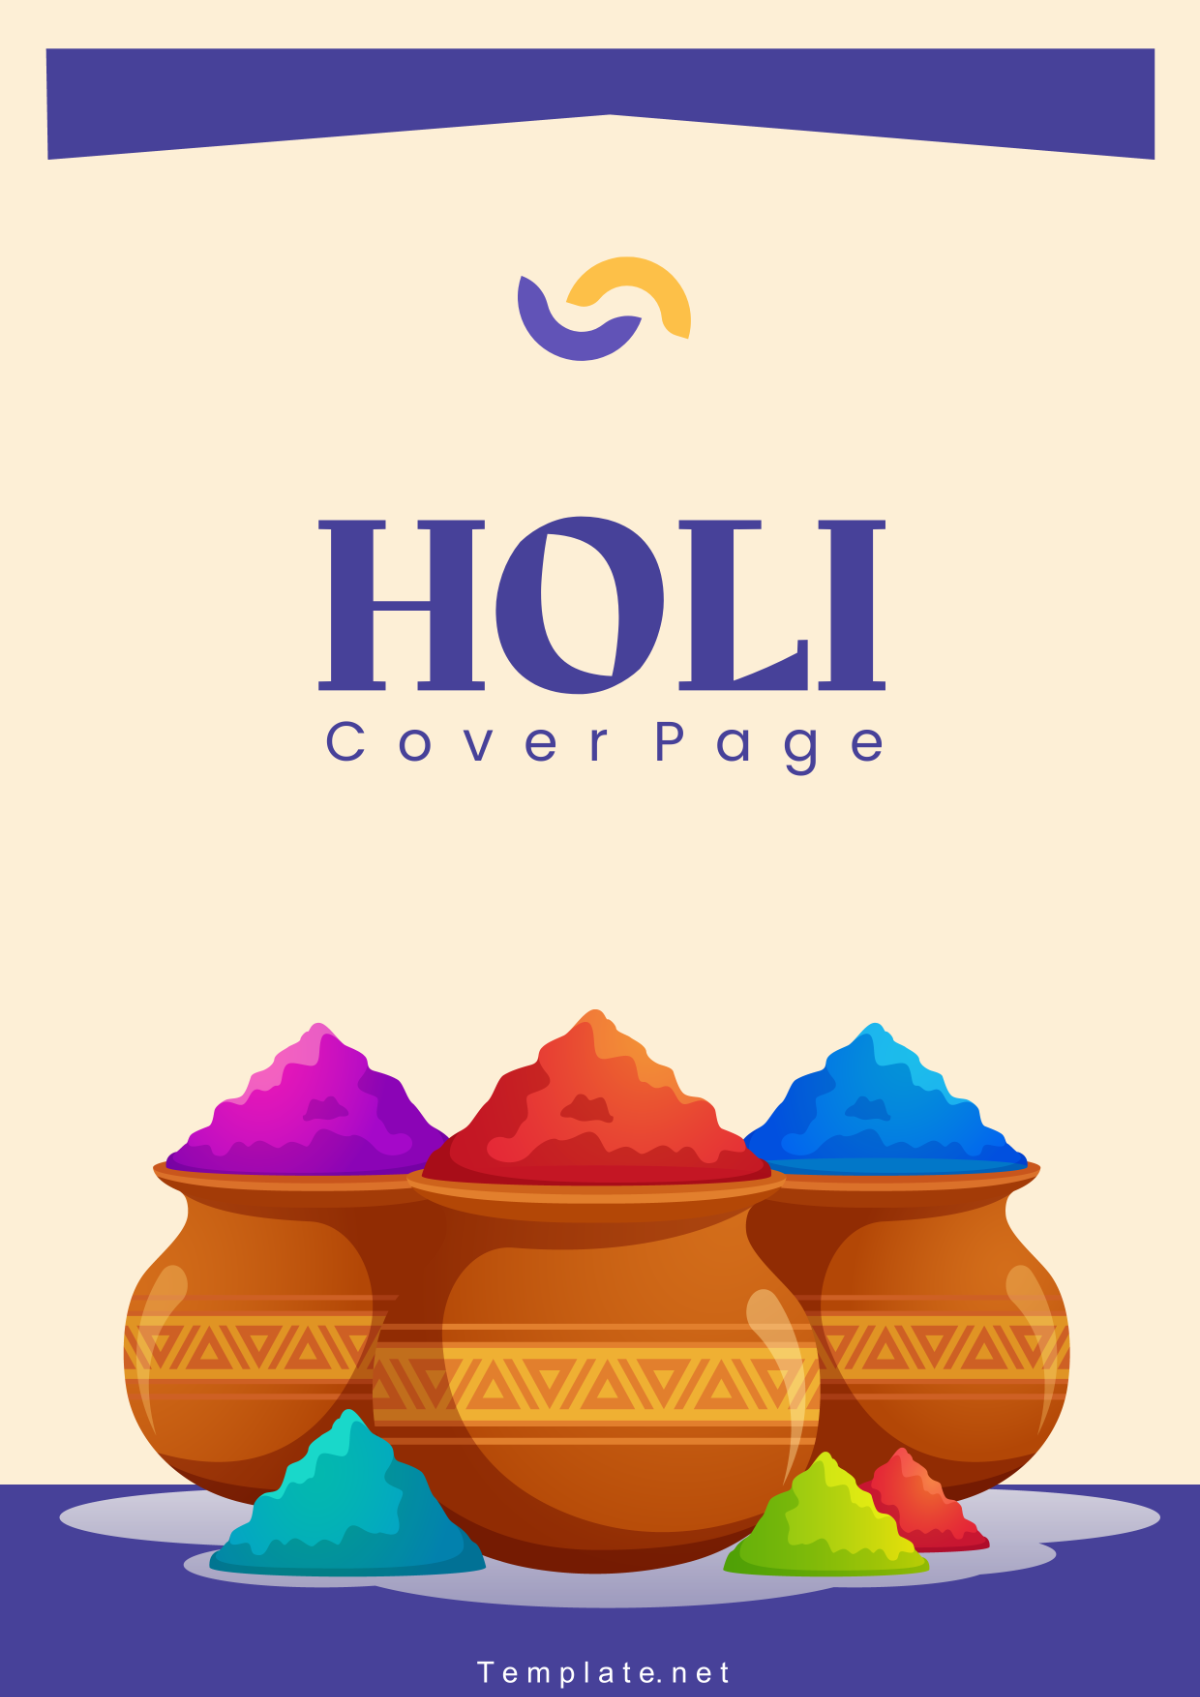 Free Holi Cover Page Template